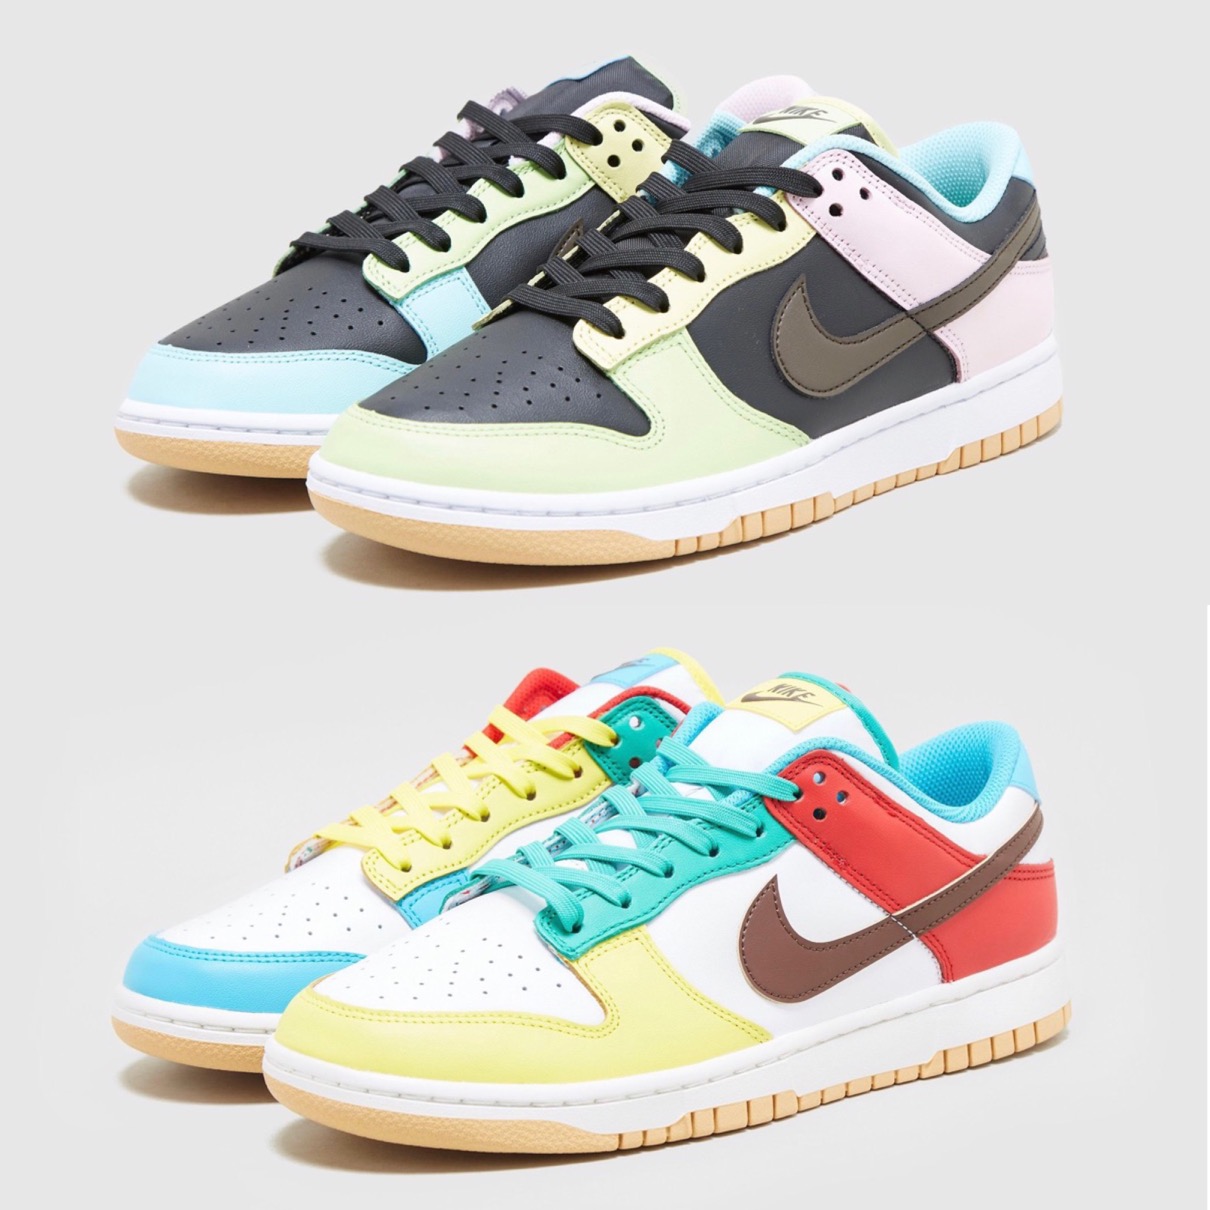 Nike】左右非対称なDunk Low SE “Free.99” Packが国内5月7日/5月26日に ...